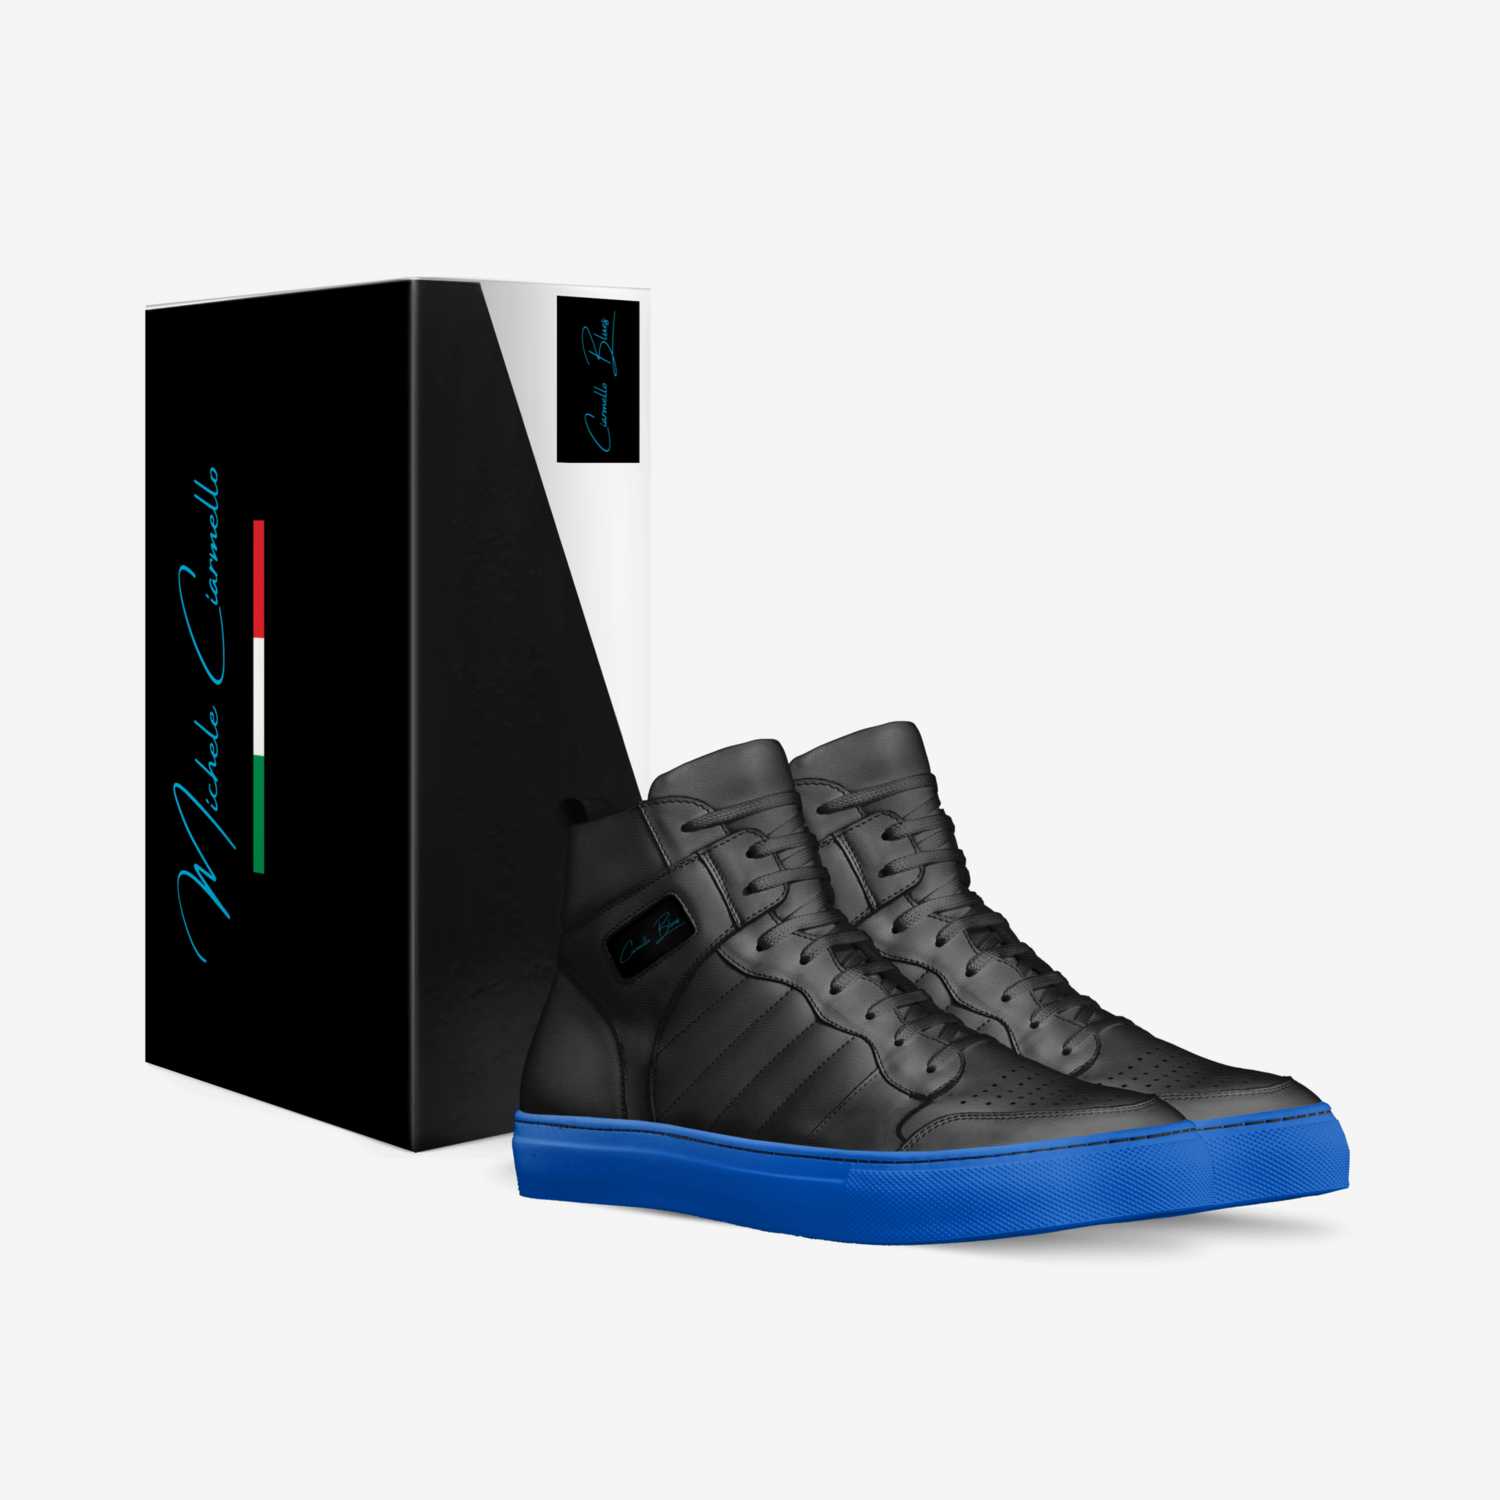 Ciarmello Blues custom made in Italy shoes by Limitless Kicks | Box view